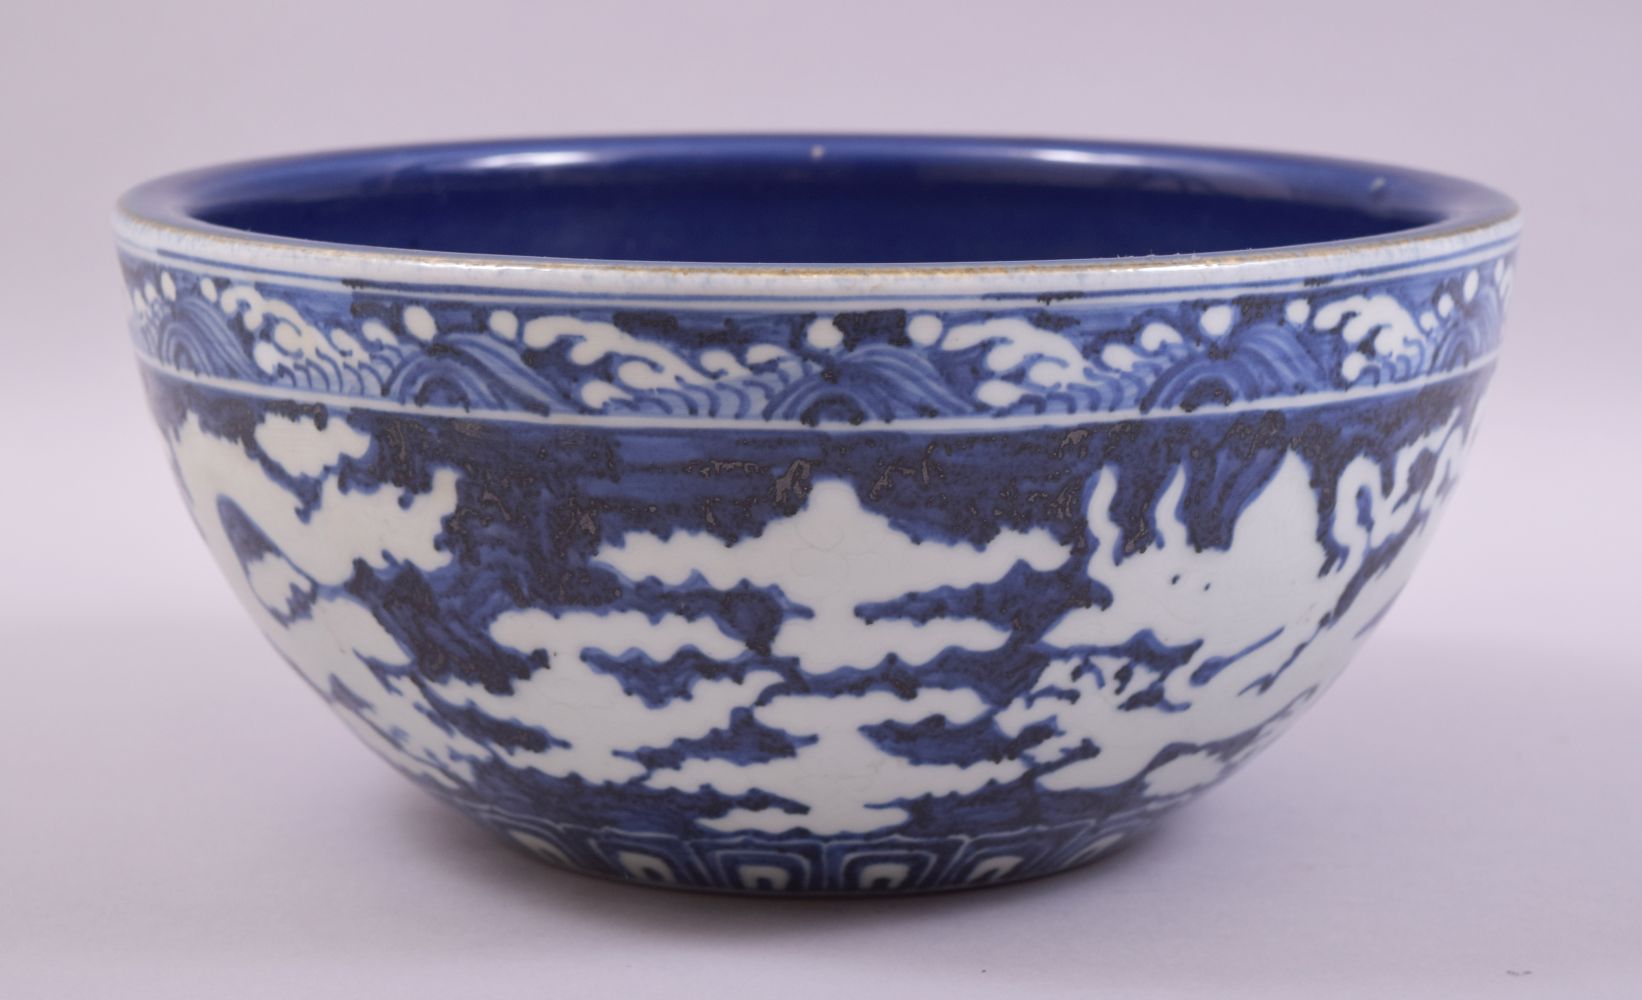 A LARGE CHINESE SACRIFICIAL BLUE GLAZE DRAGON BOWL, the exterior with white dragons and clouds